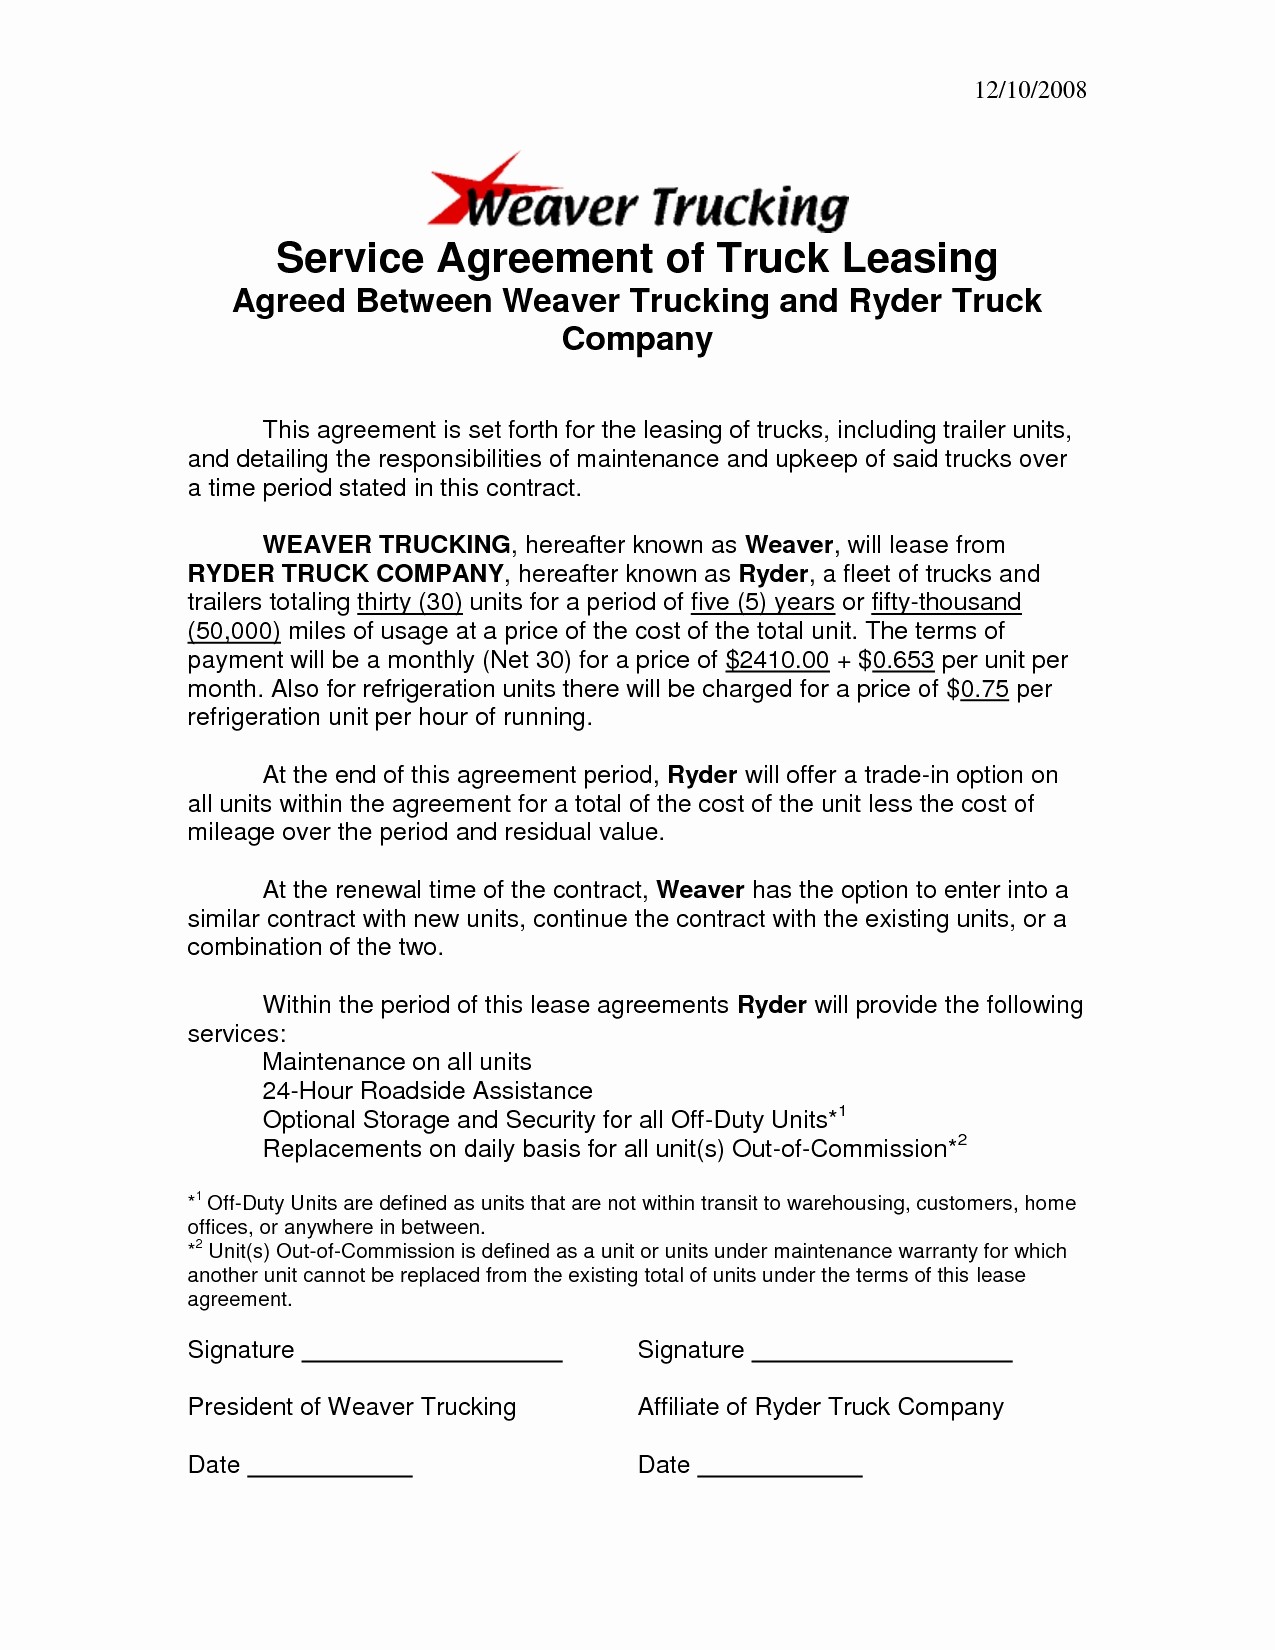 50 Elegant Truck Driver Contract Agreement Template DOCUMENTS Document